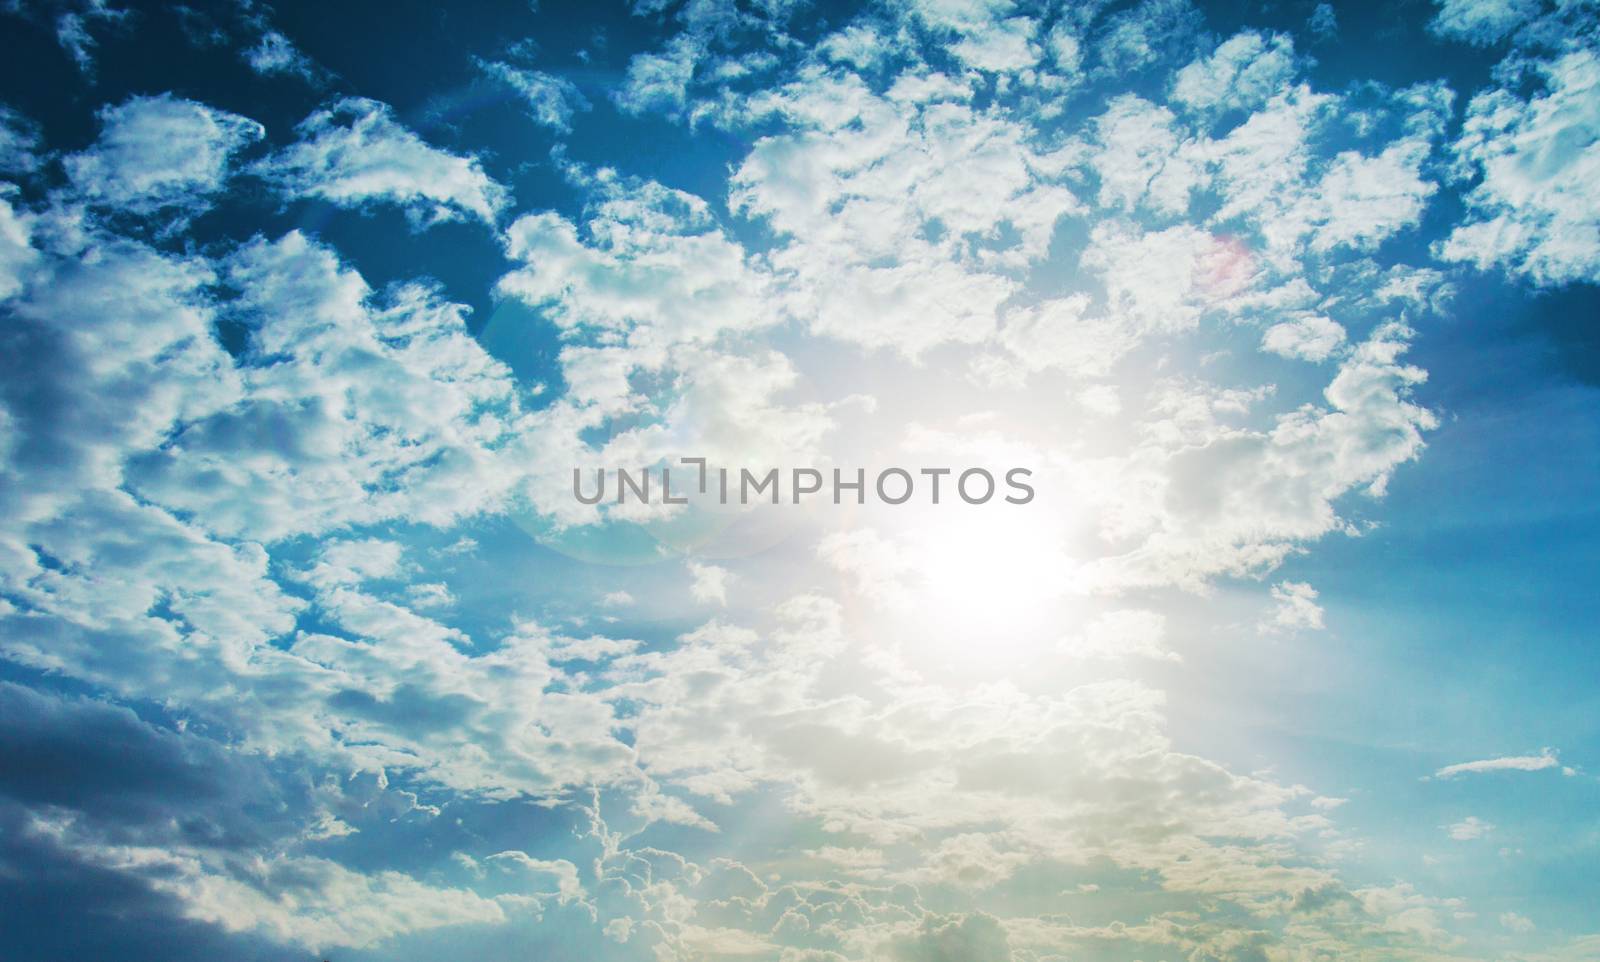 shining sun with lens flare. Blue sky with clouds background